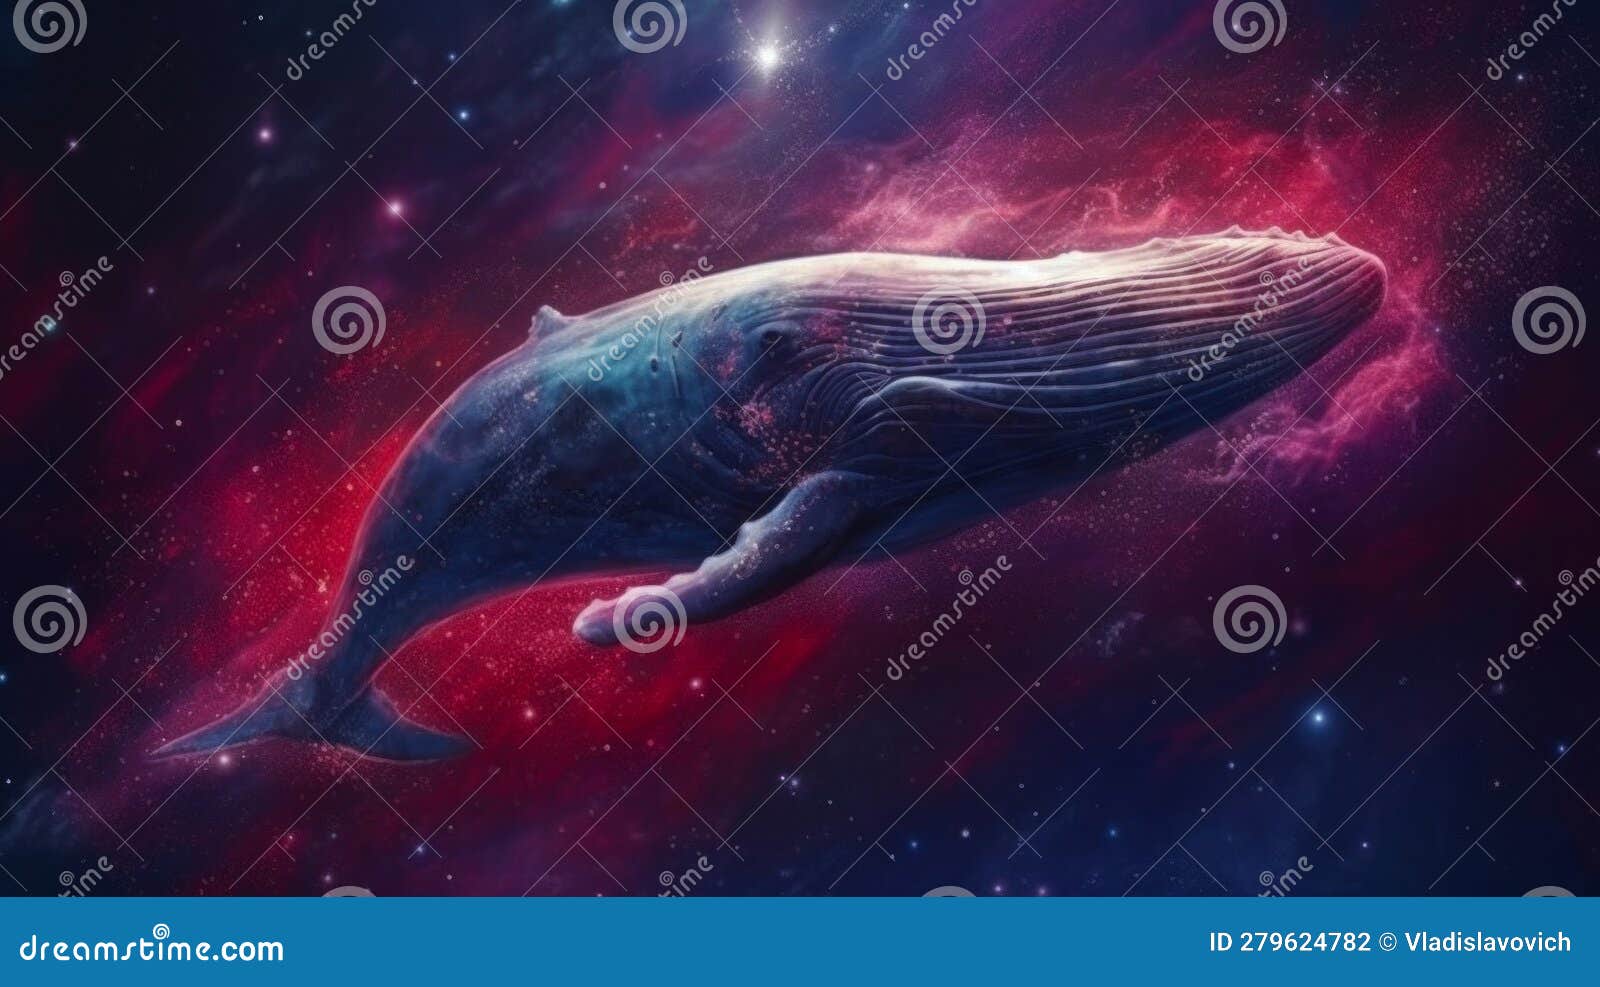 space whale swimming through the universe, the idea of a fantastic  of a cetacean traveling in space through the